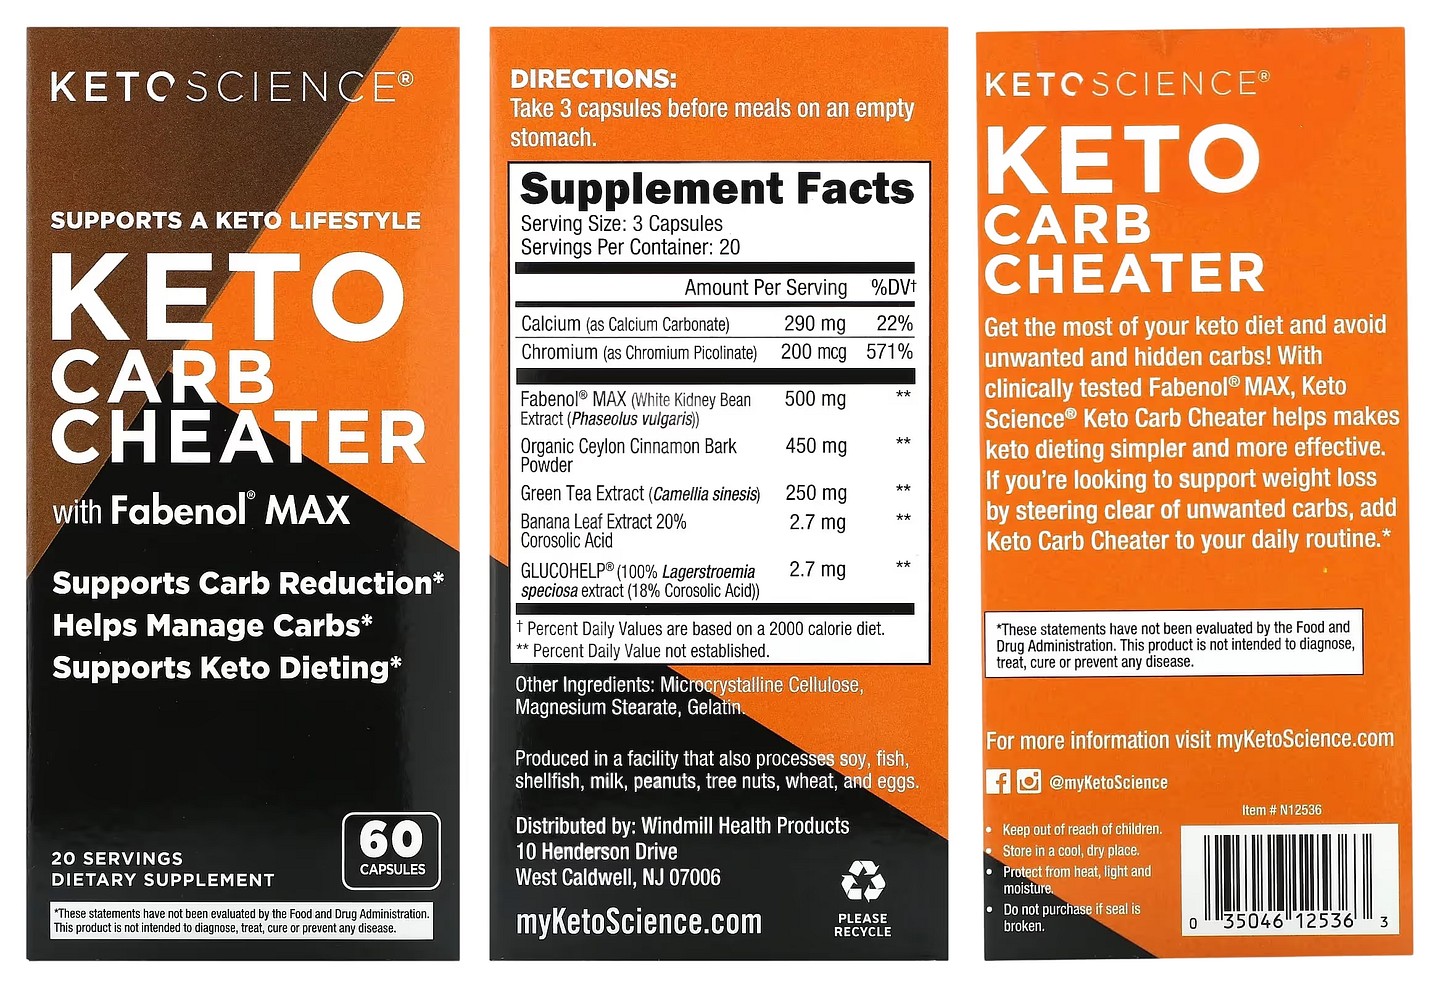 Keto Science, Keto Carb Cheater with Fabenol Max packaging